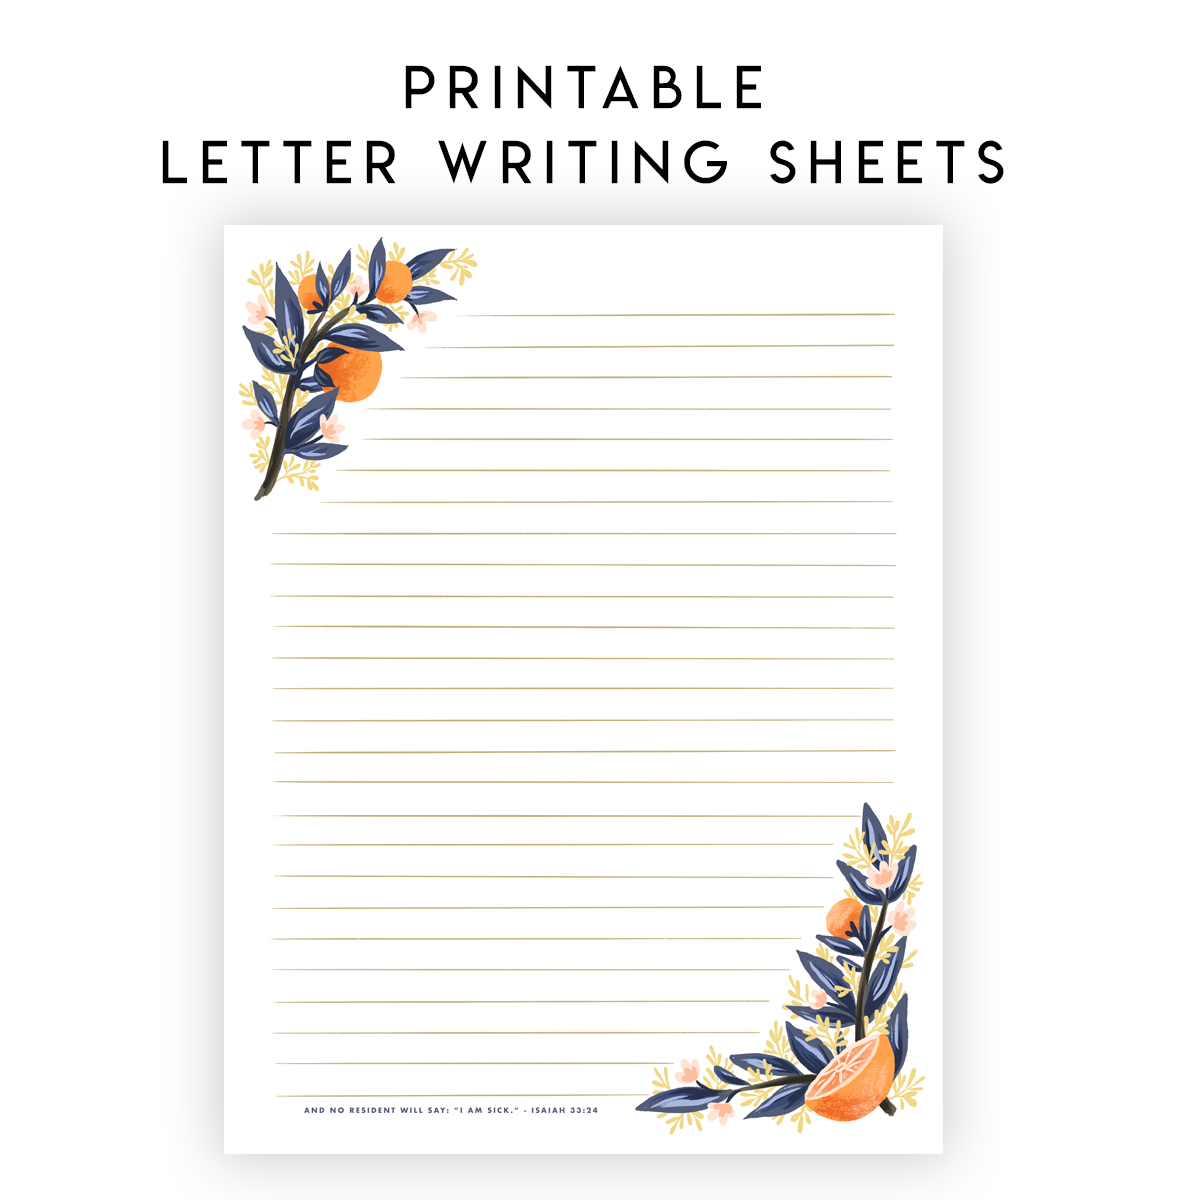 Printable Letter Writing Sheets - No Resident Will Say "I am sick" - Isaiah 33:24